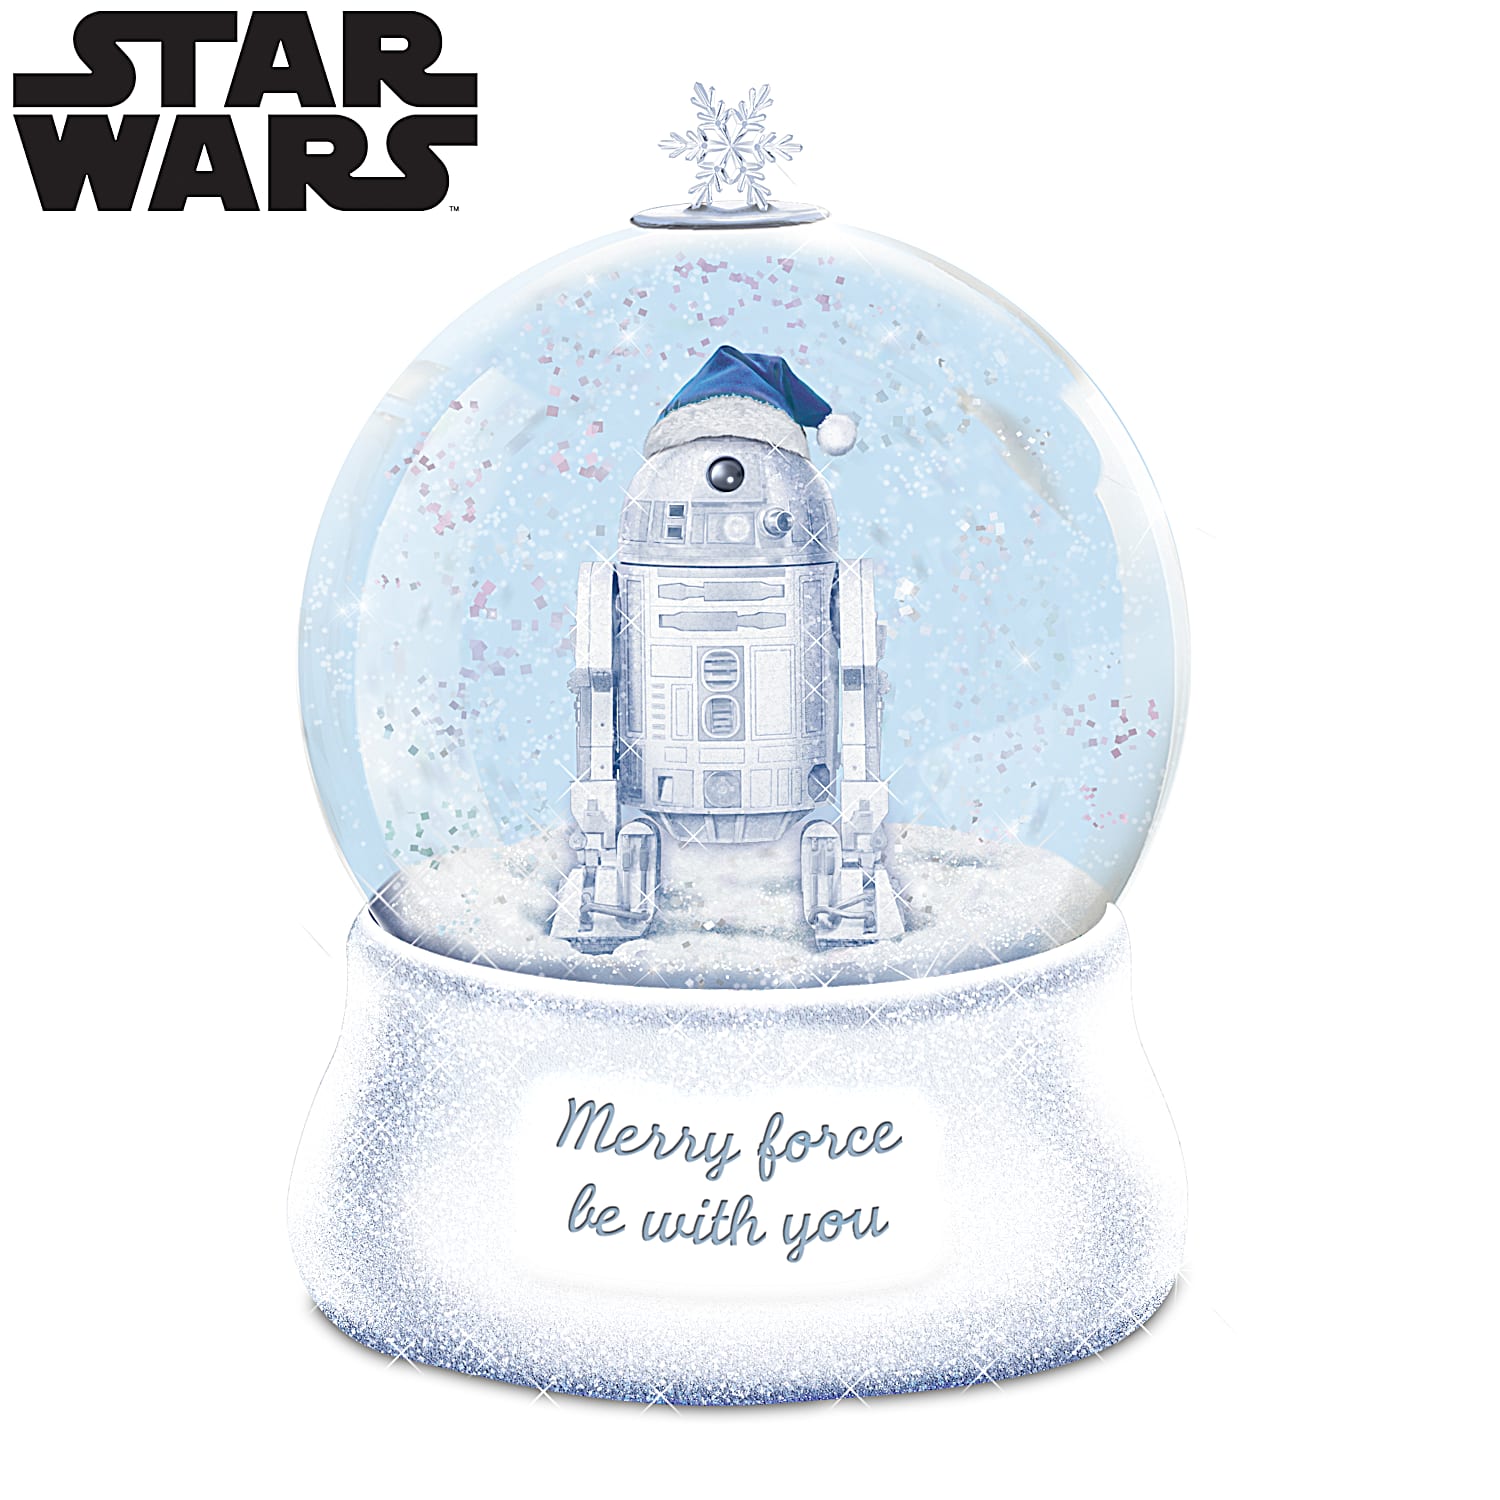 May The Force Be With You Glitter Globe